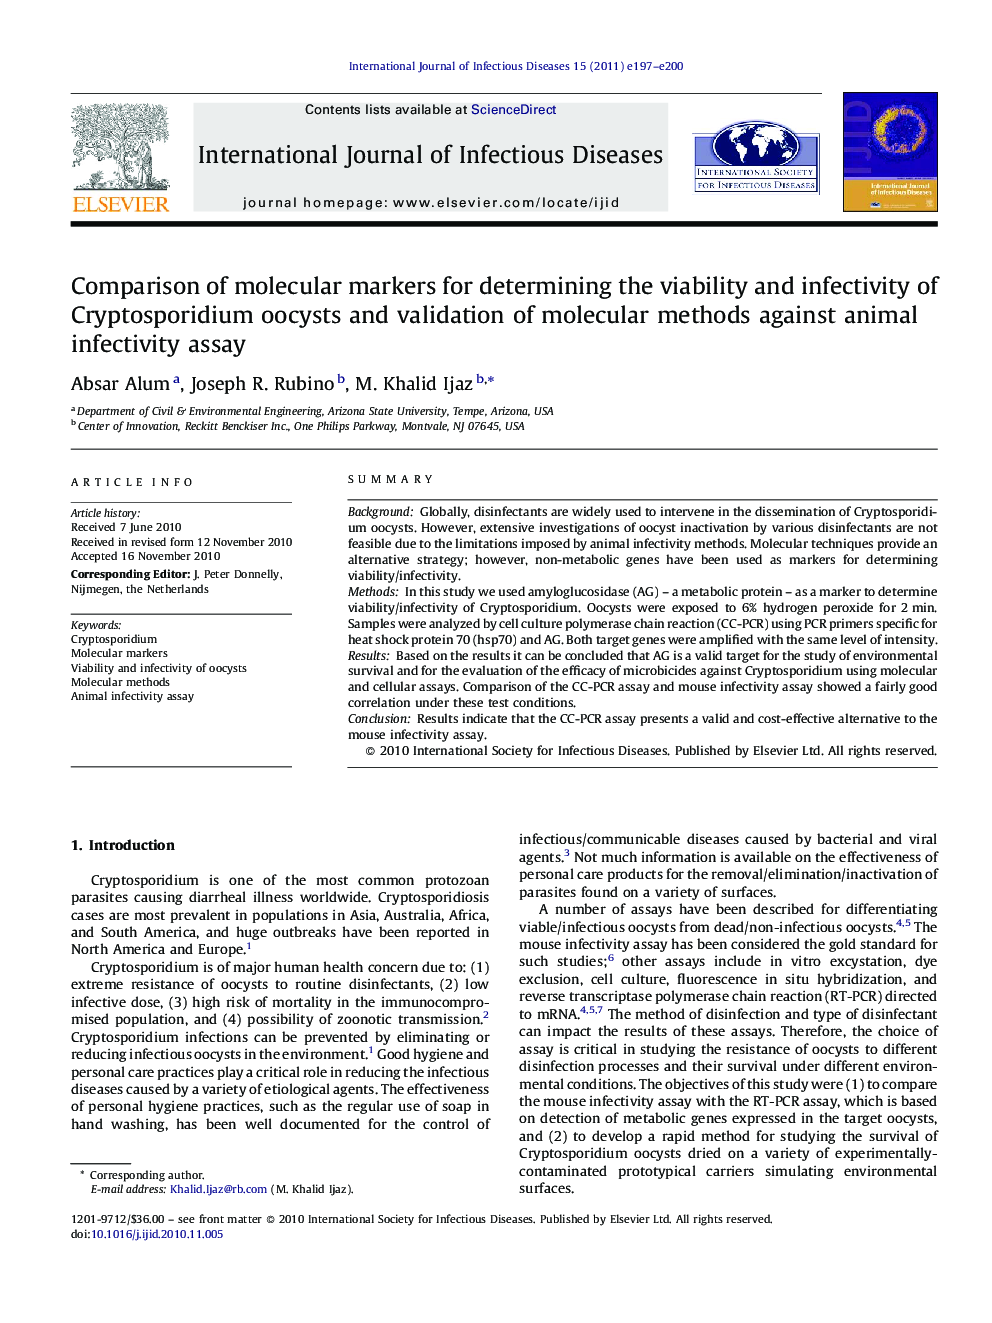 Comparison of molecular markers for determining the viability and infectivity of Cryptosporidium oocysts and validation of molecular methods against animal infectivity assay